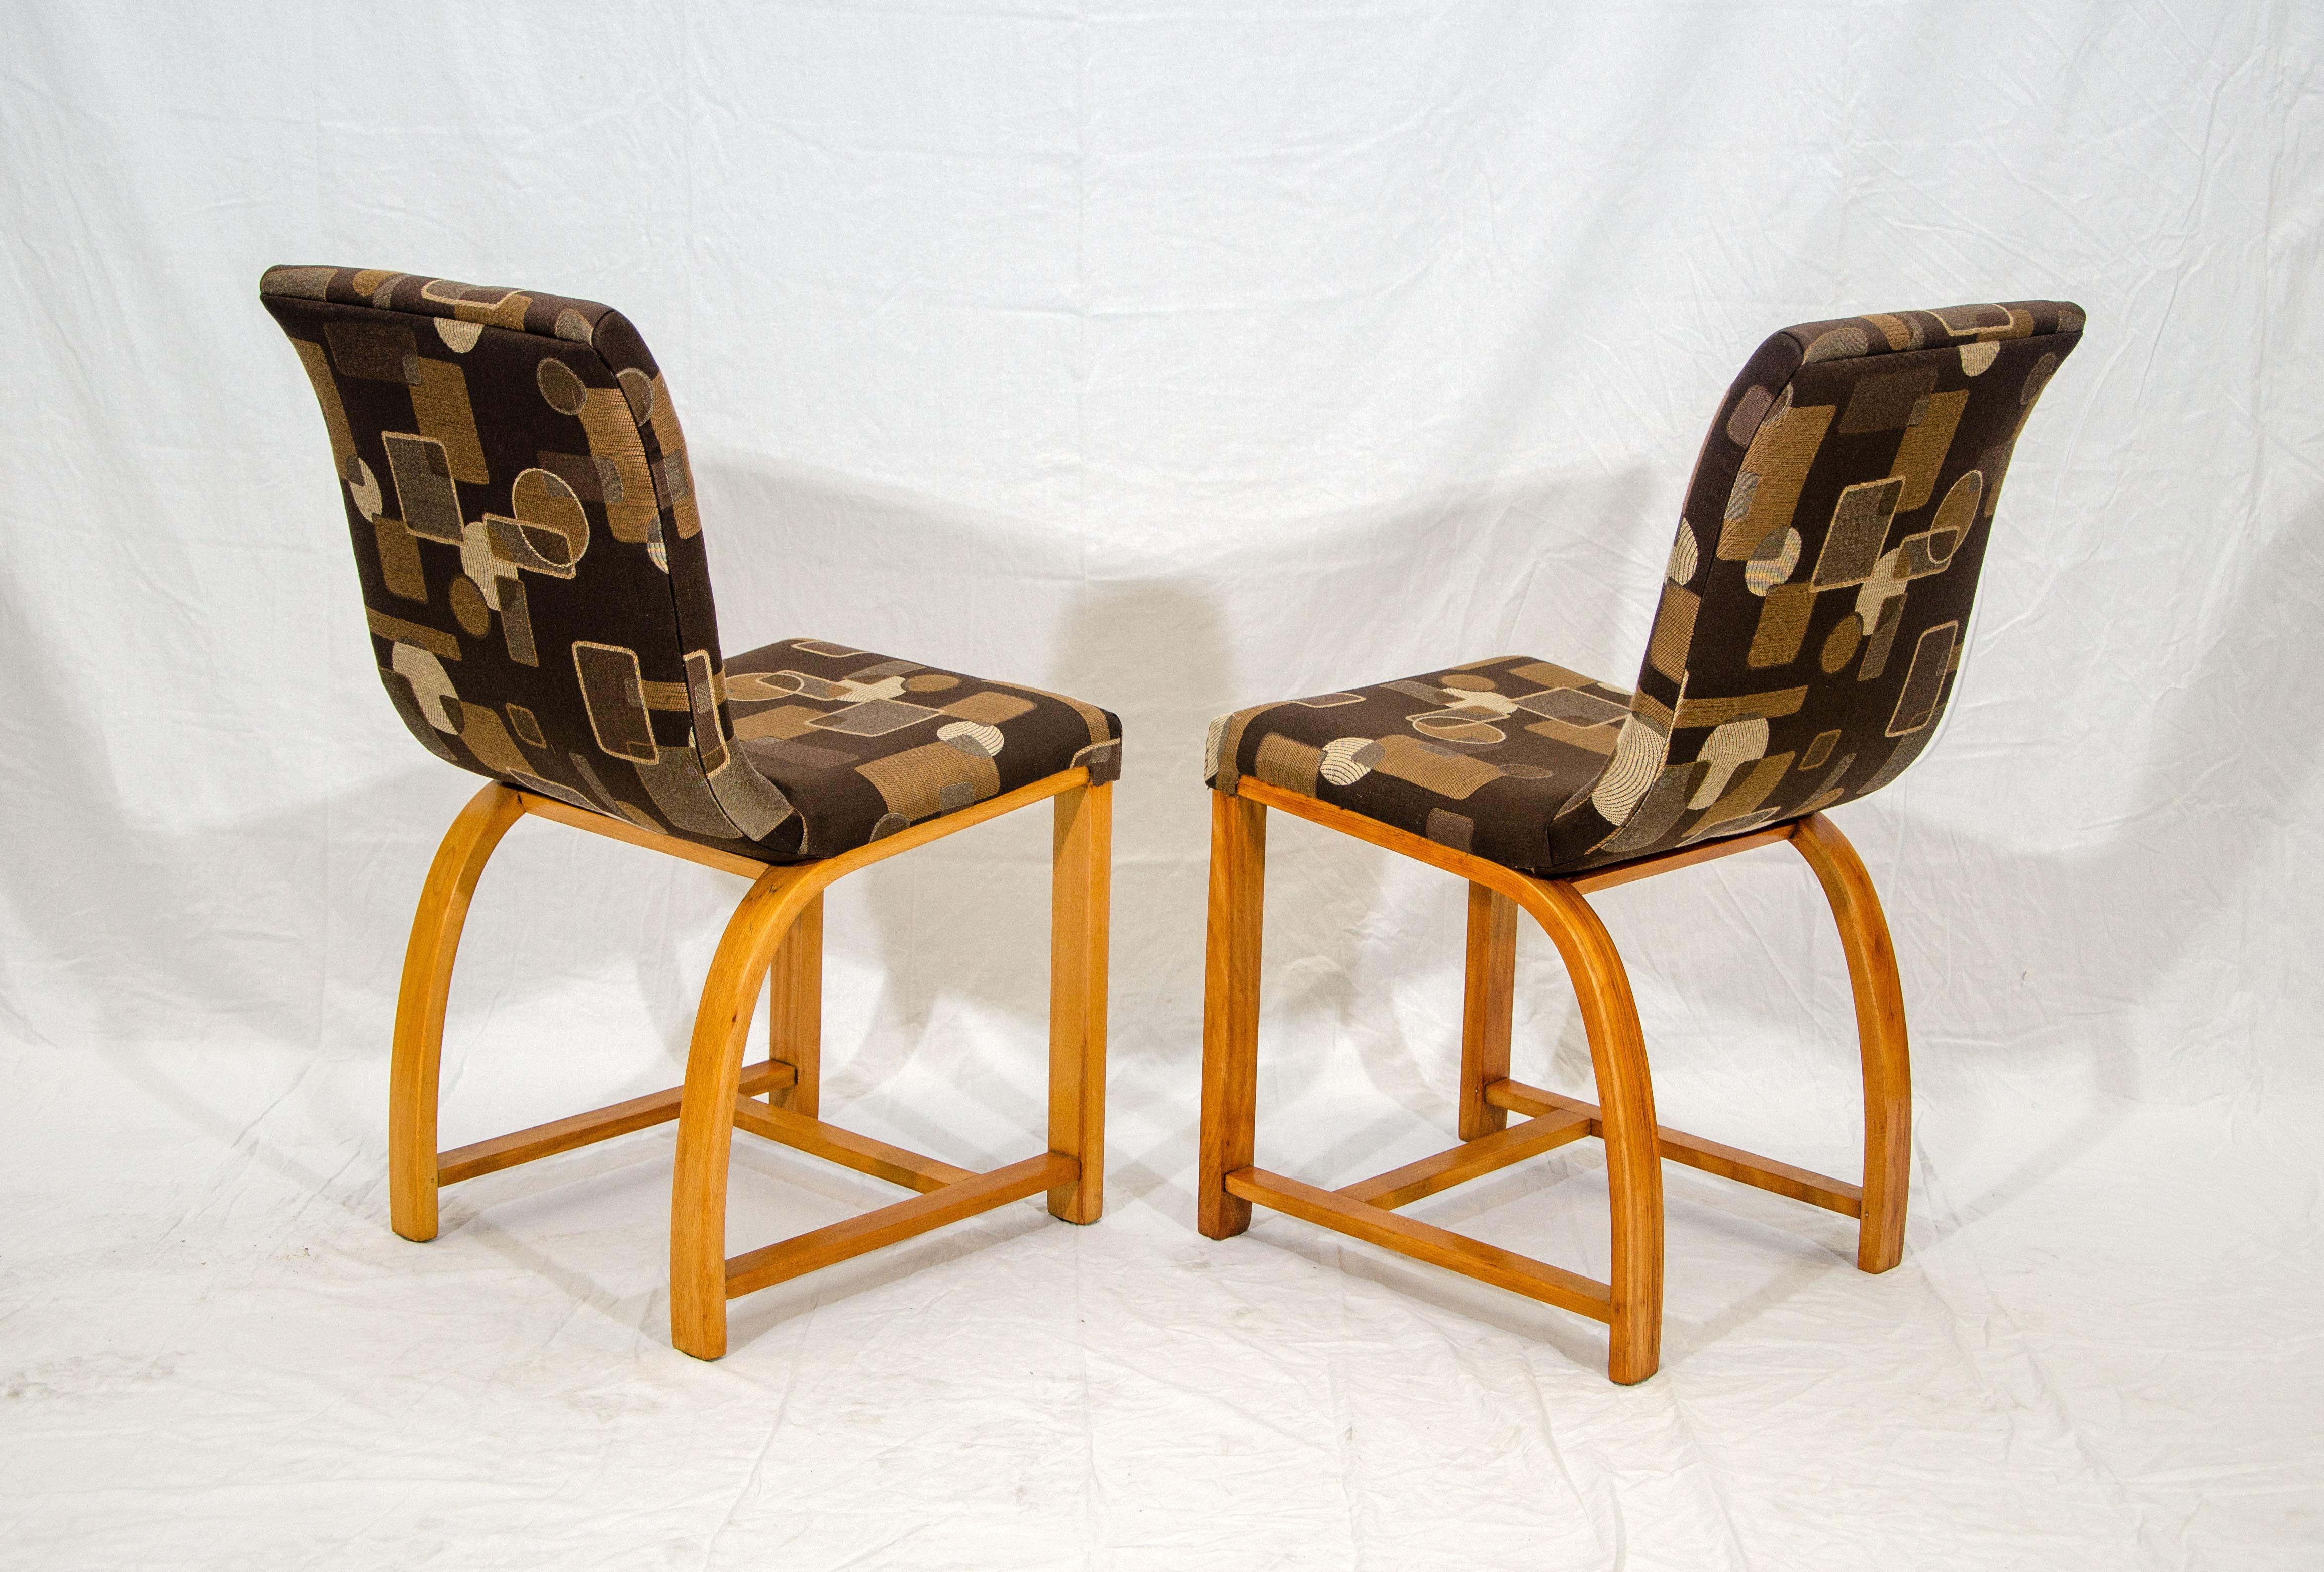 American Set of Four Dining Chairs, Gilbert Rohde for Heywood Wakefield